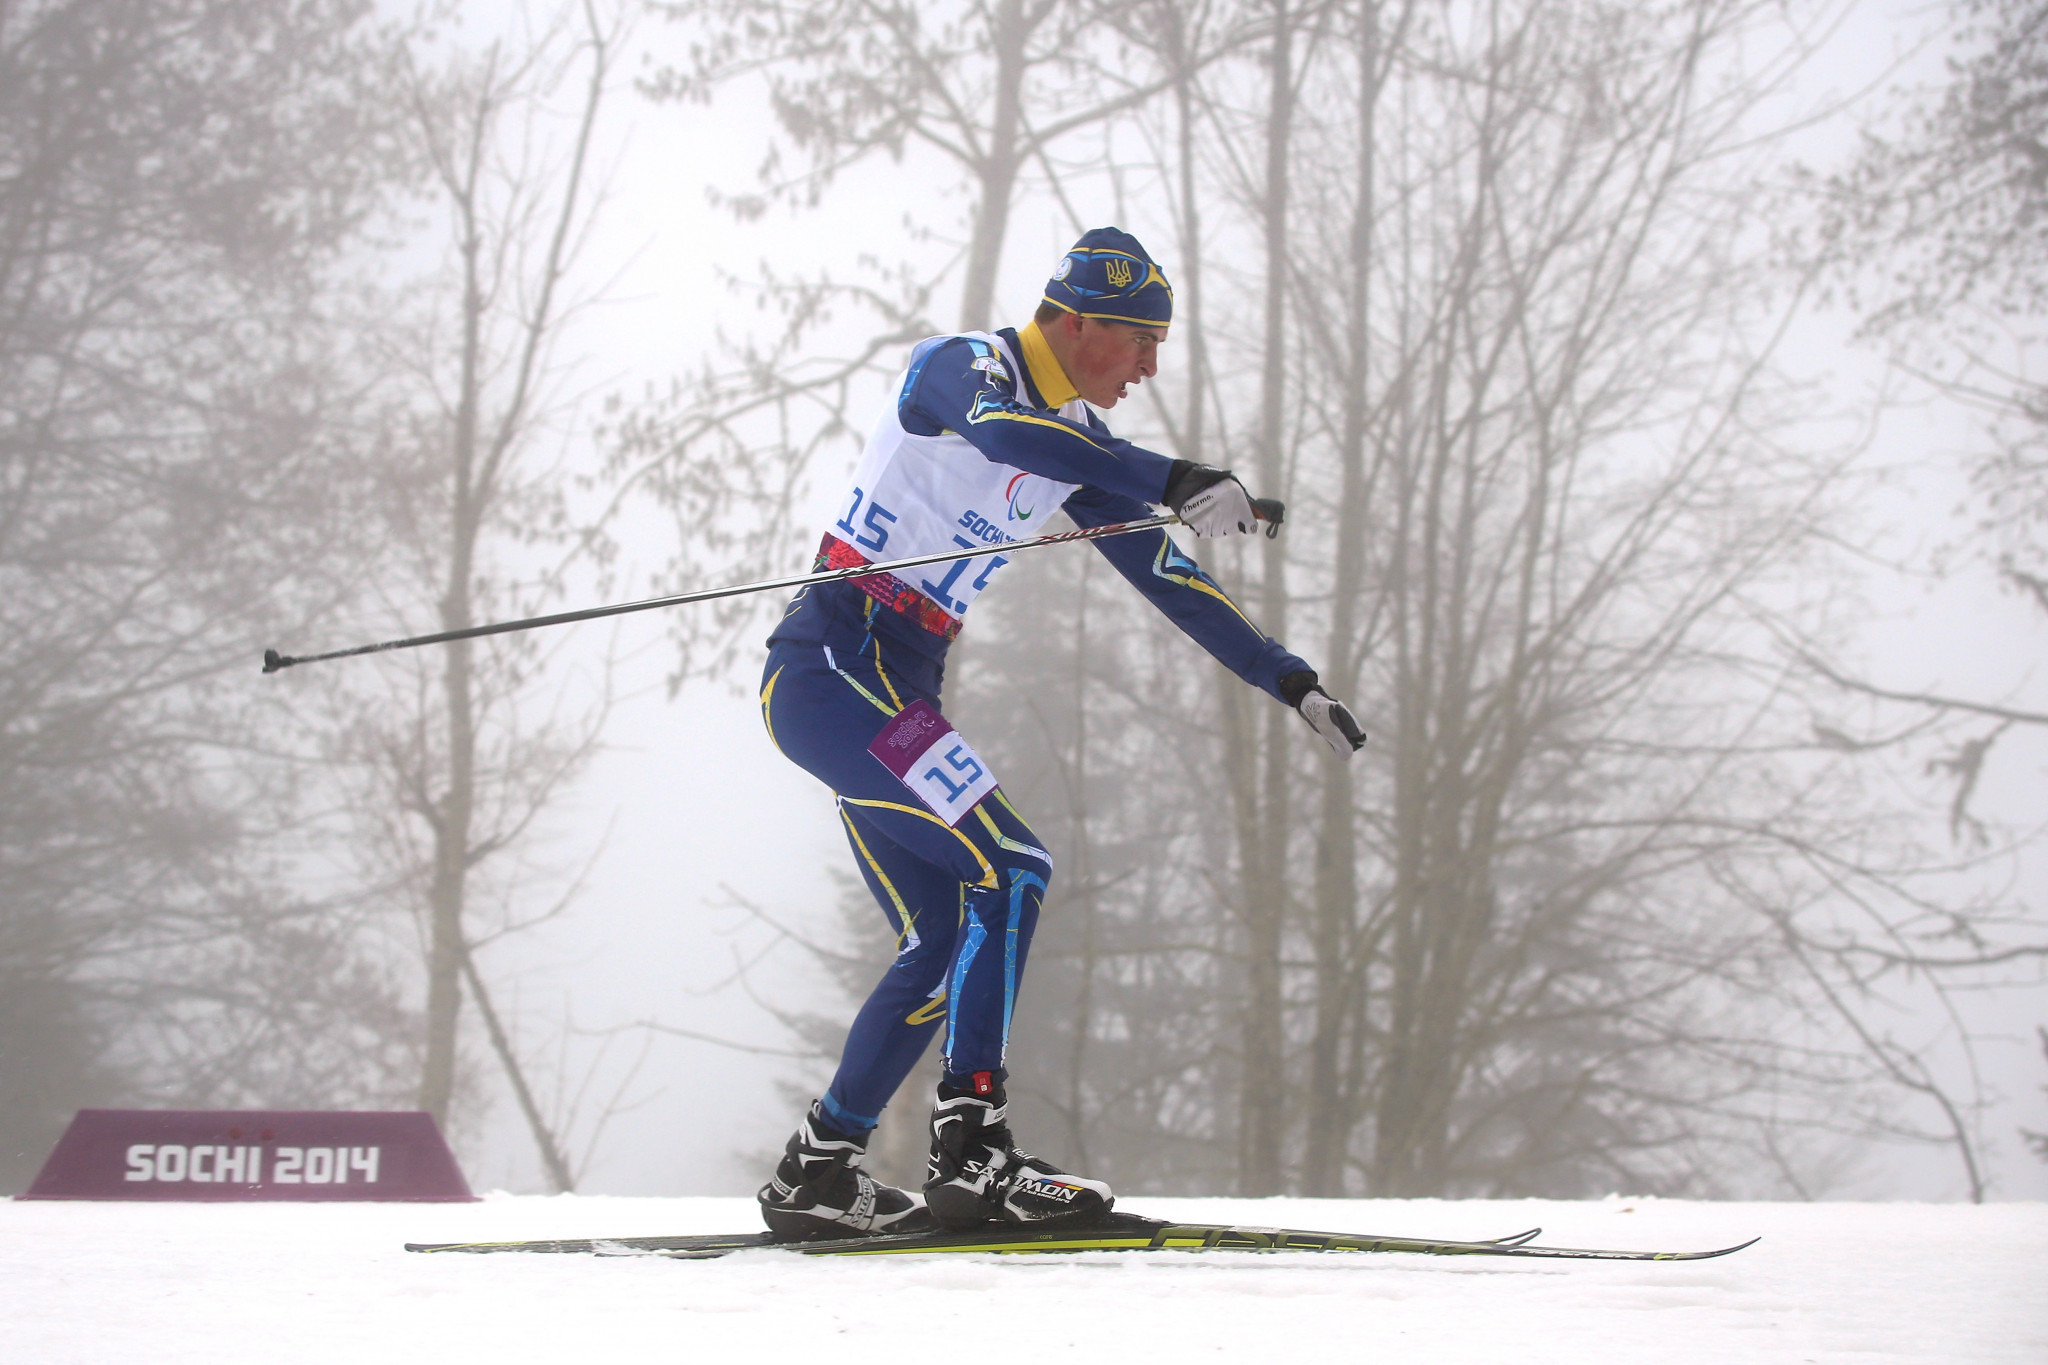 Final stage of World Para Nordic Skiing World Cup set to take place in Vuokatti